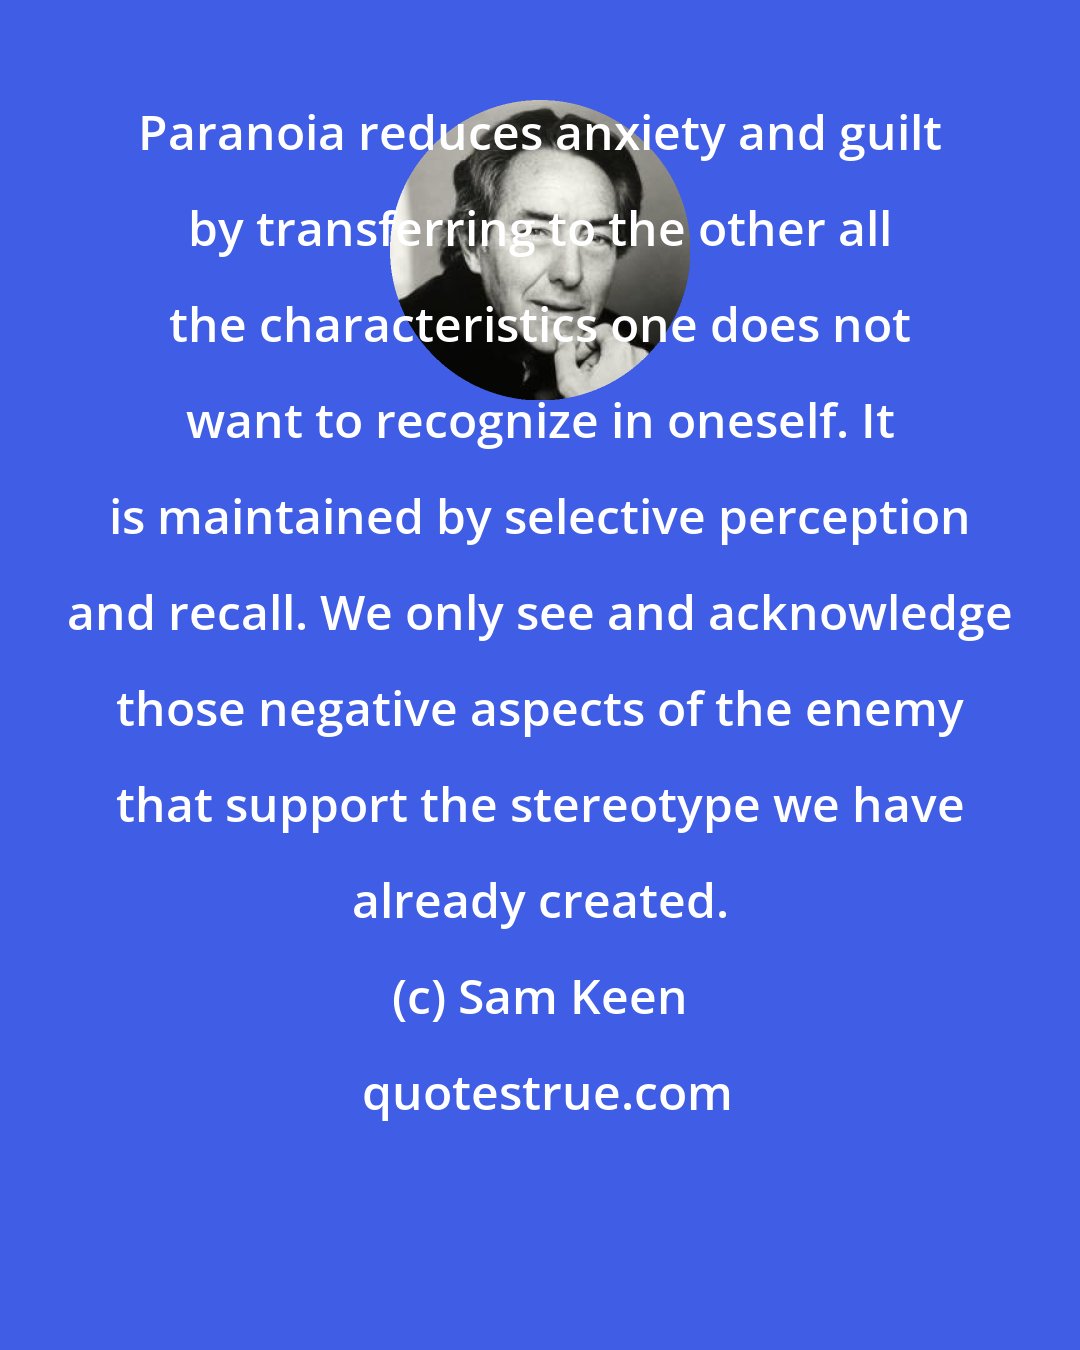 Sam Keen: Paranoia reduces anxiety and guilt by transferring to the other all the characteristics one does not want to recognize in oneself. It is maintained by selective perception and recall. We only see and acknowledge those negative aspects of the enemy that support the stereotype we have already created.